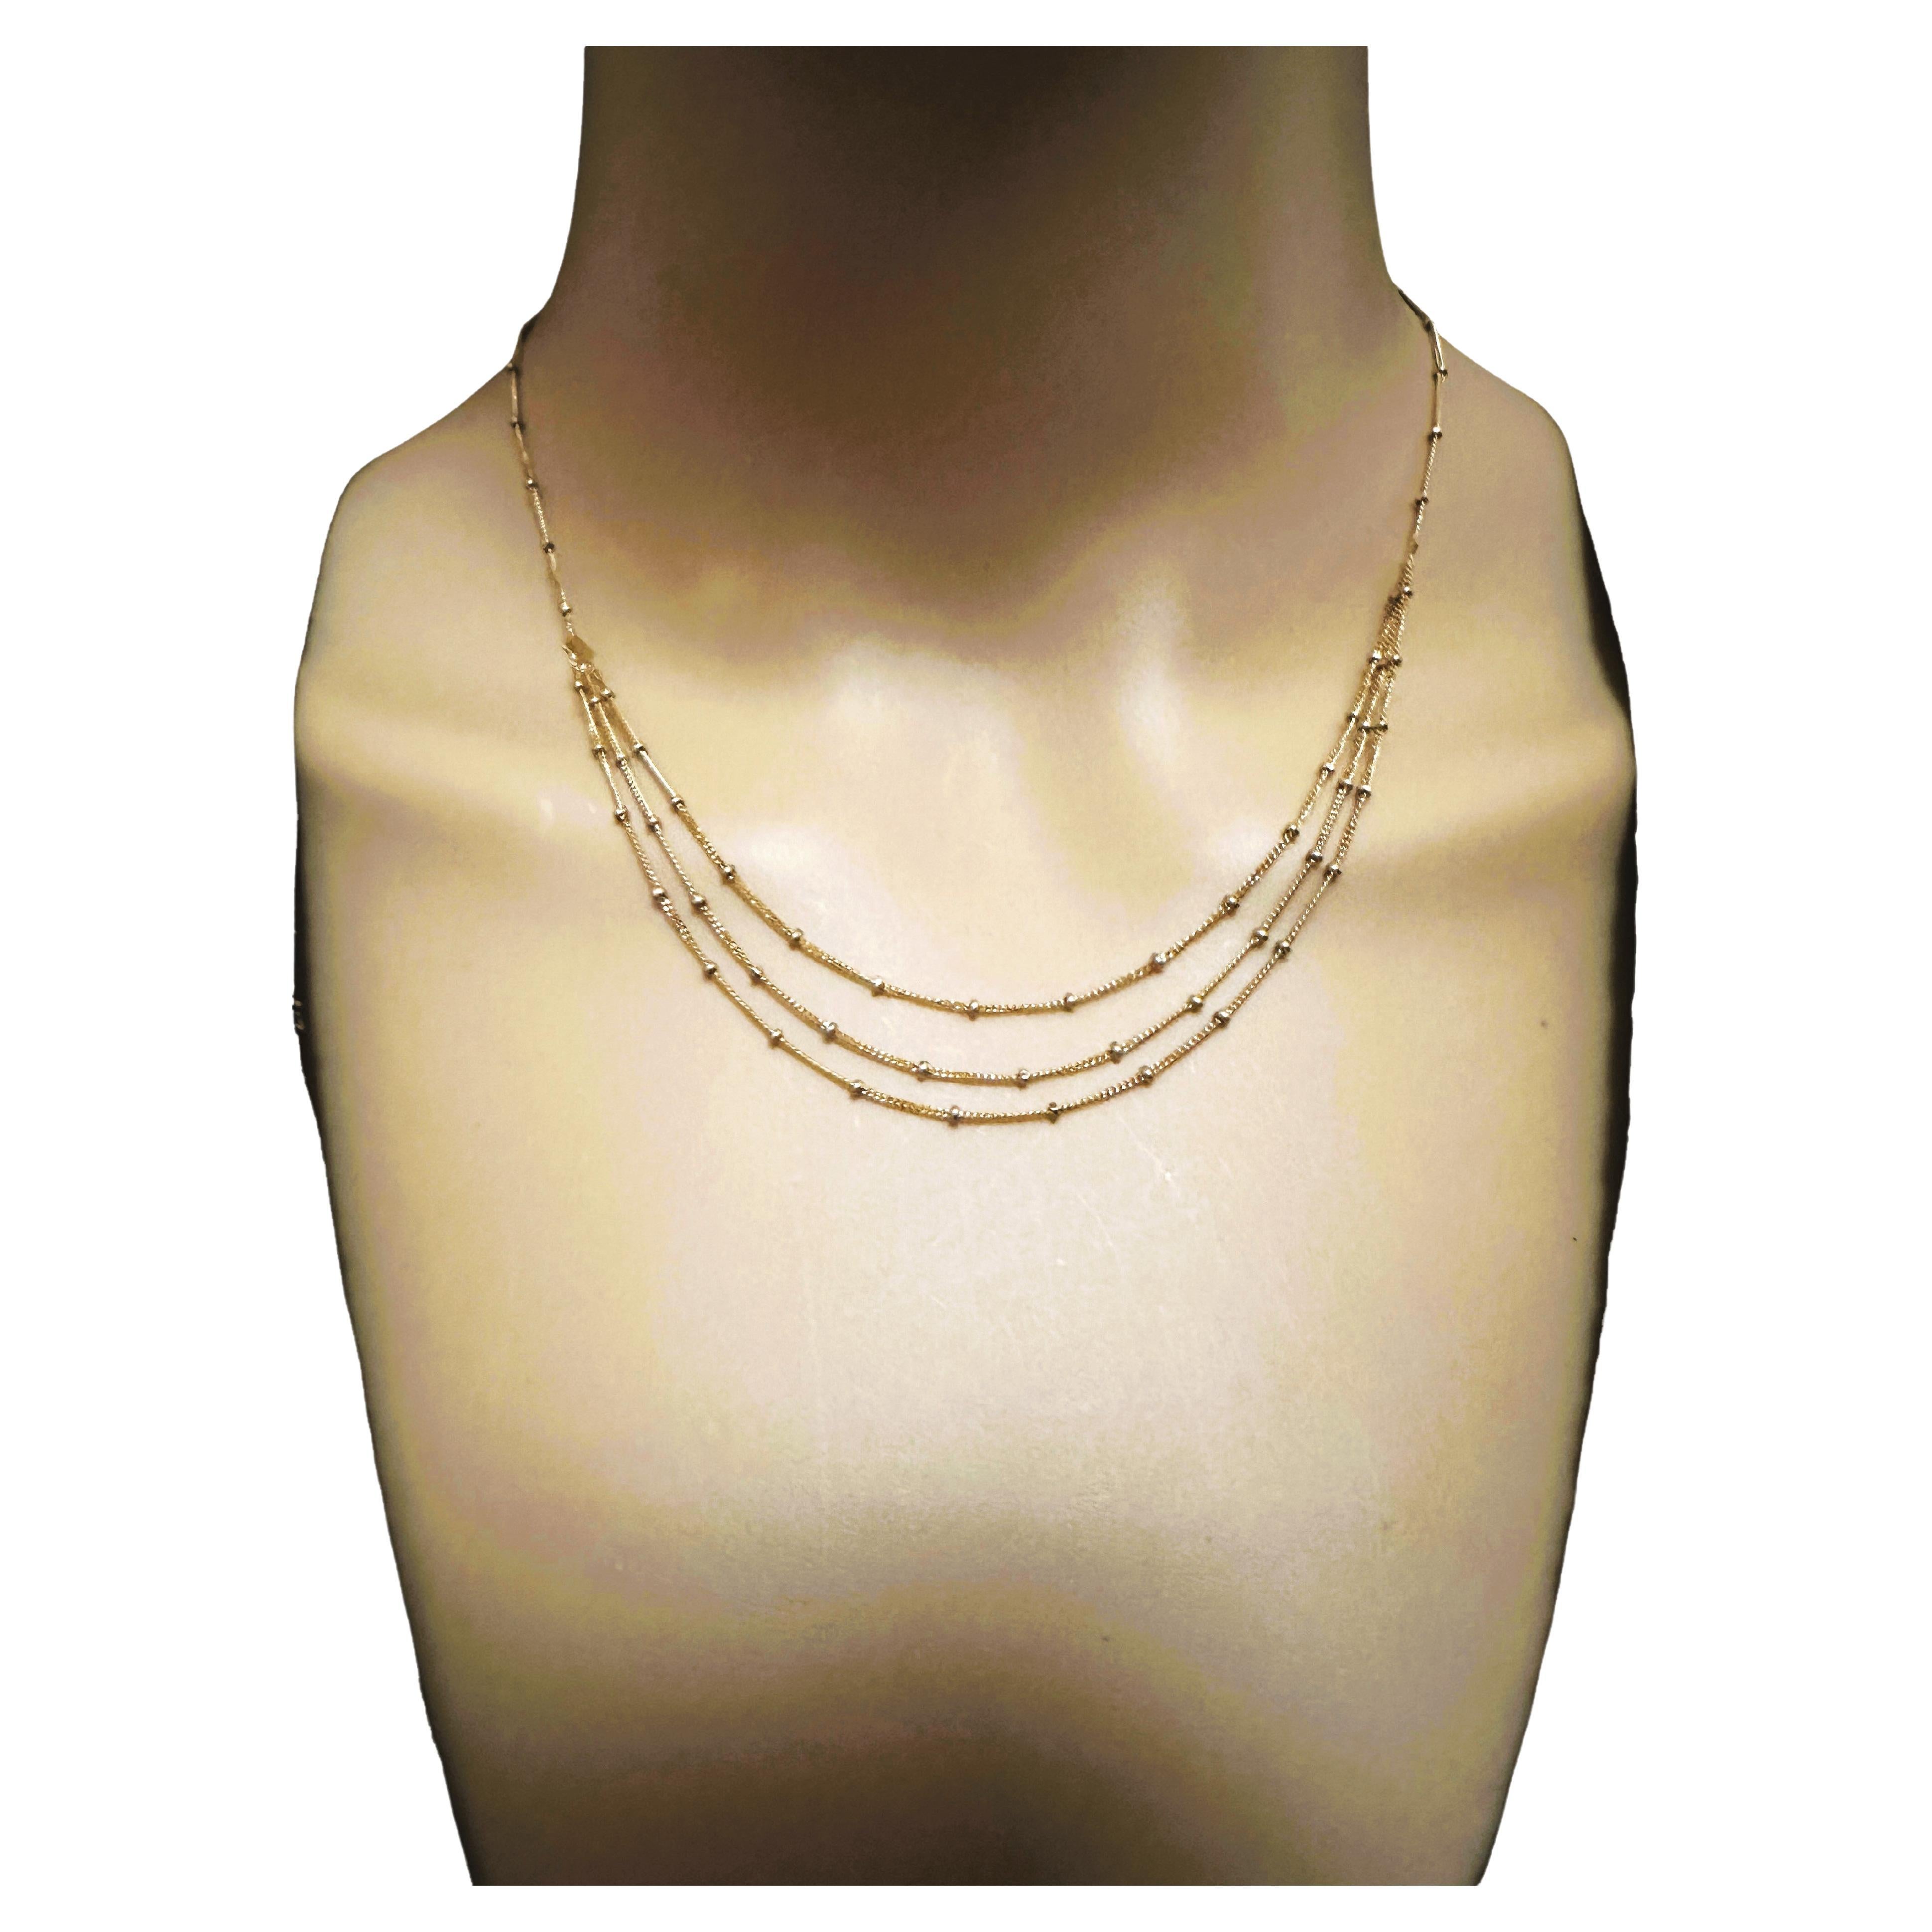 18k Yellow Gold Italian 3-Strand Necklace with Tiny Beads - Signed - 17"